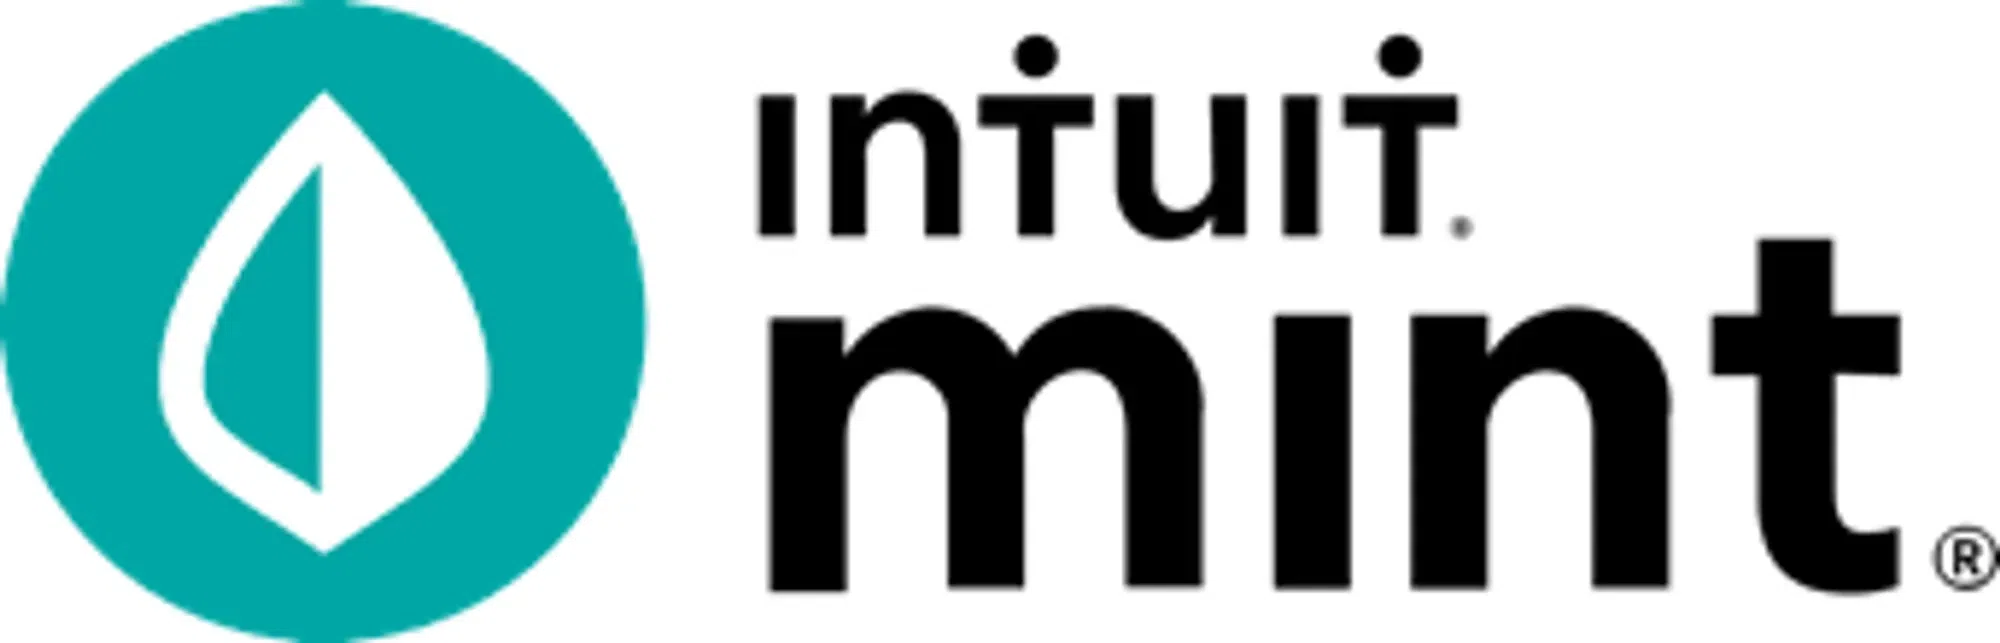 what does intuit mint do